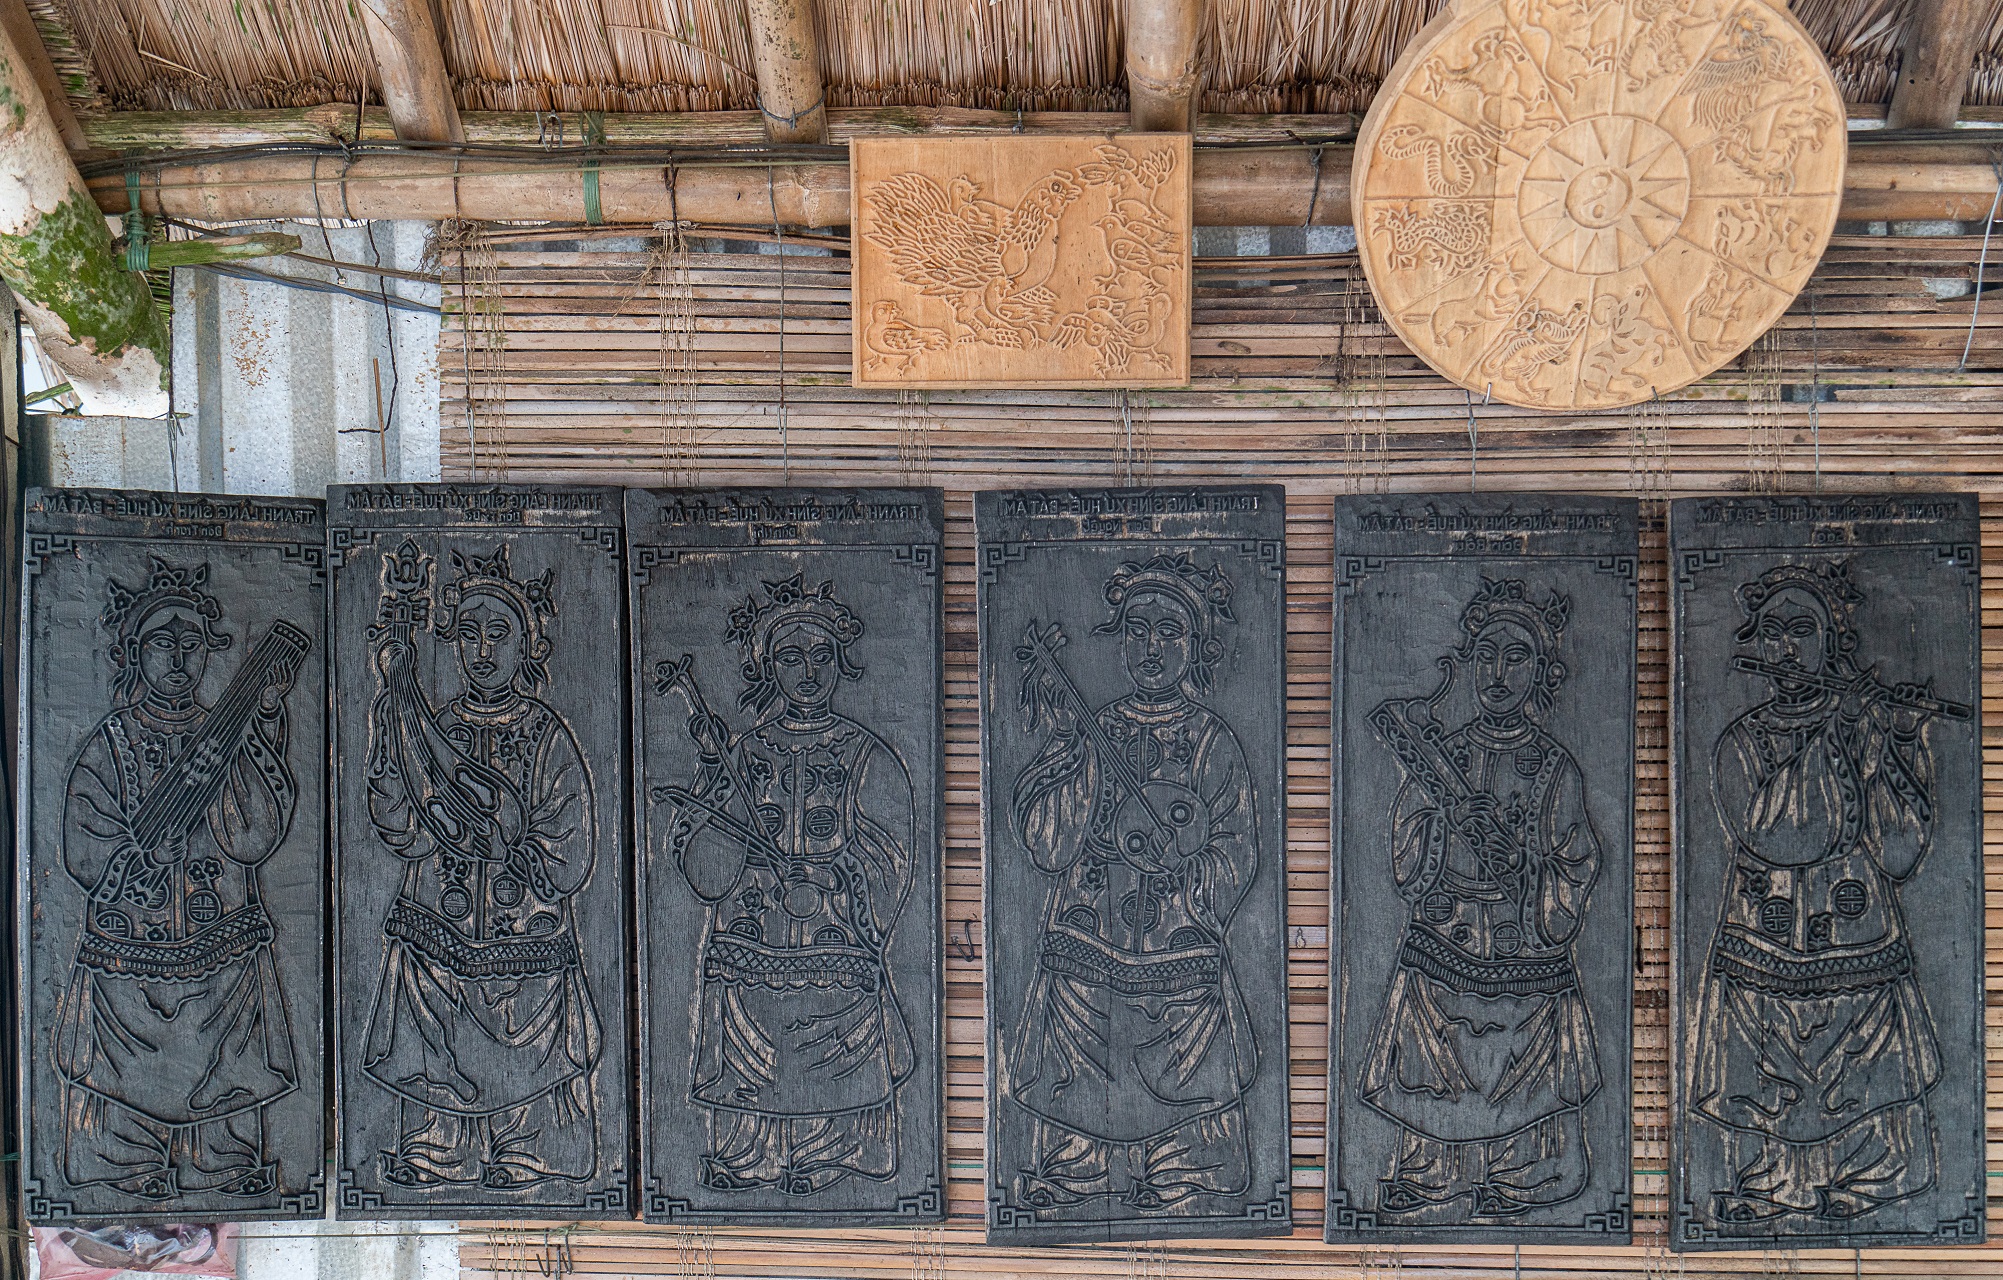 A set of woodblocks about Bat Am, in which people play eight different musical instruments often used in festivals and events. Photo: Nguyen Trung Au / Tuoi Tre News